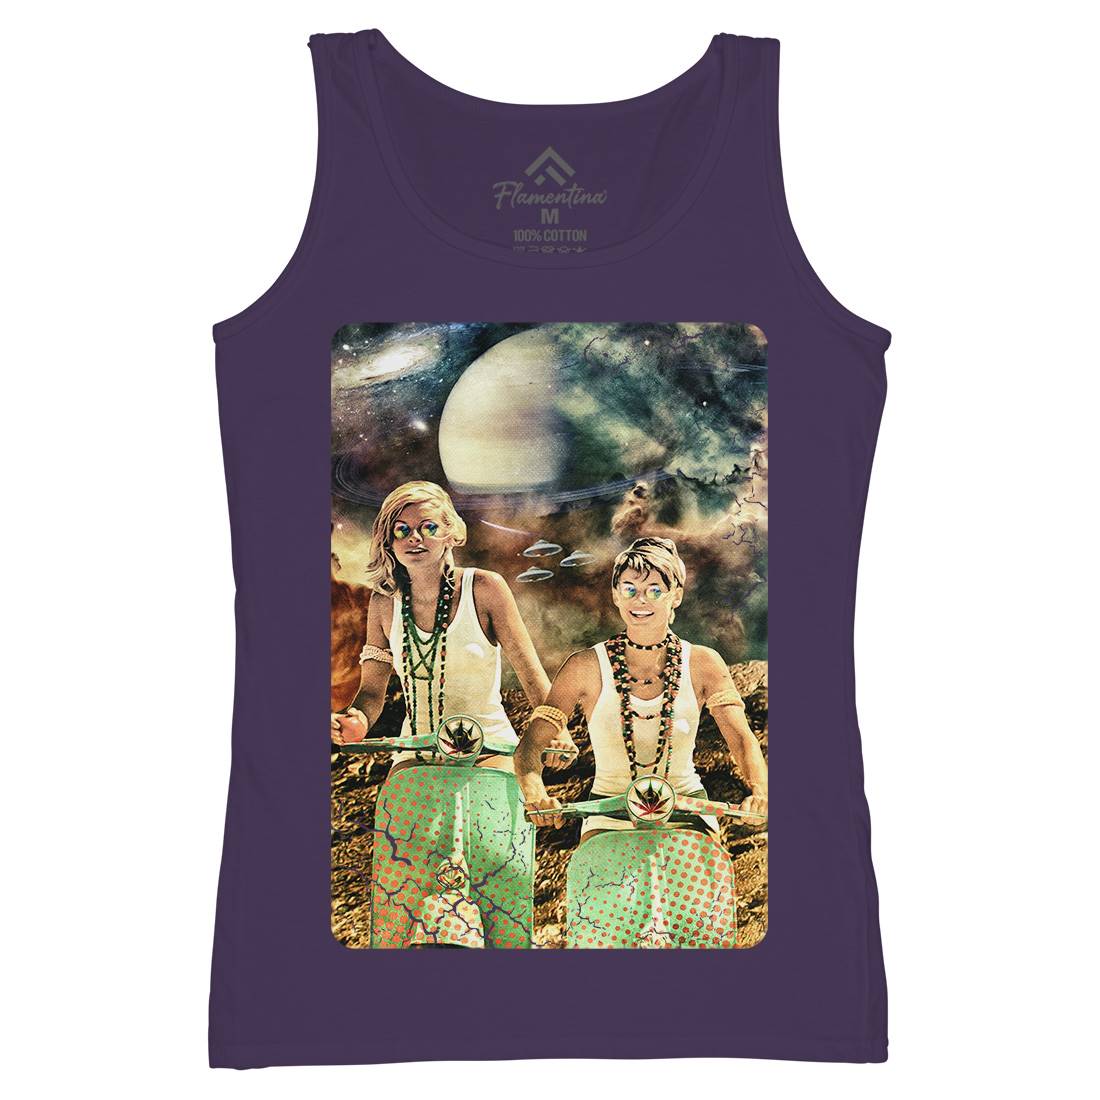 Galactic Cruise Womens Organic Tank Top Vest Space A839